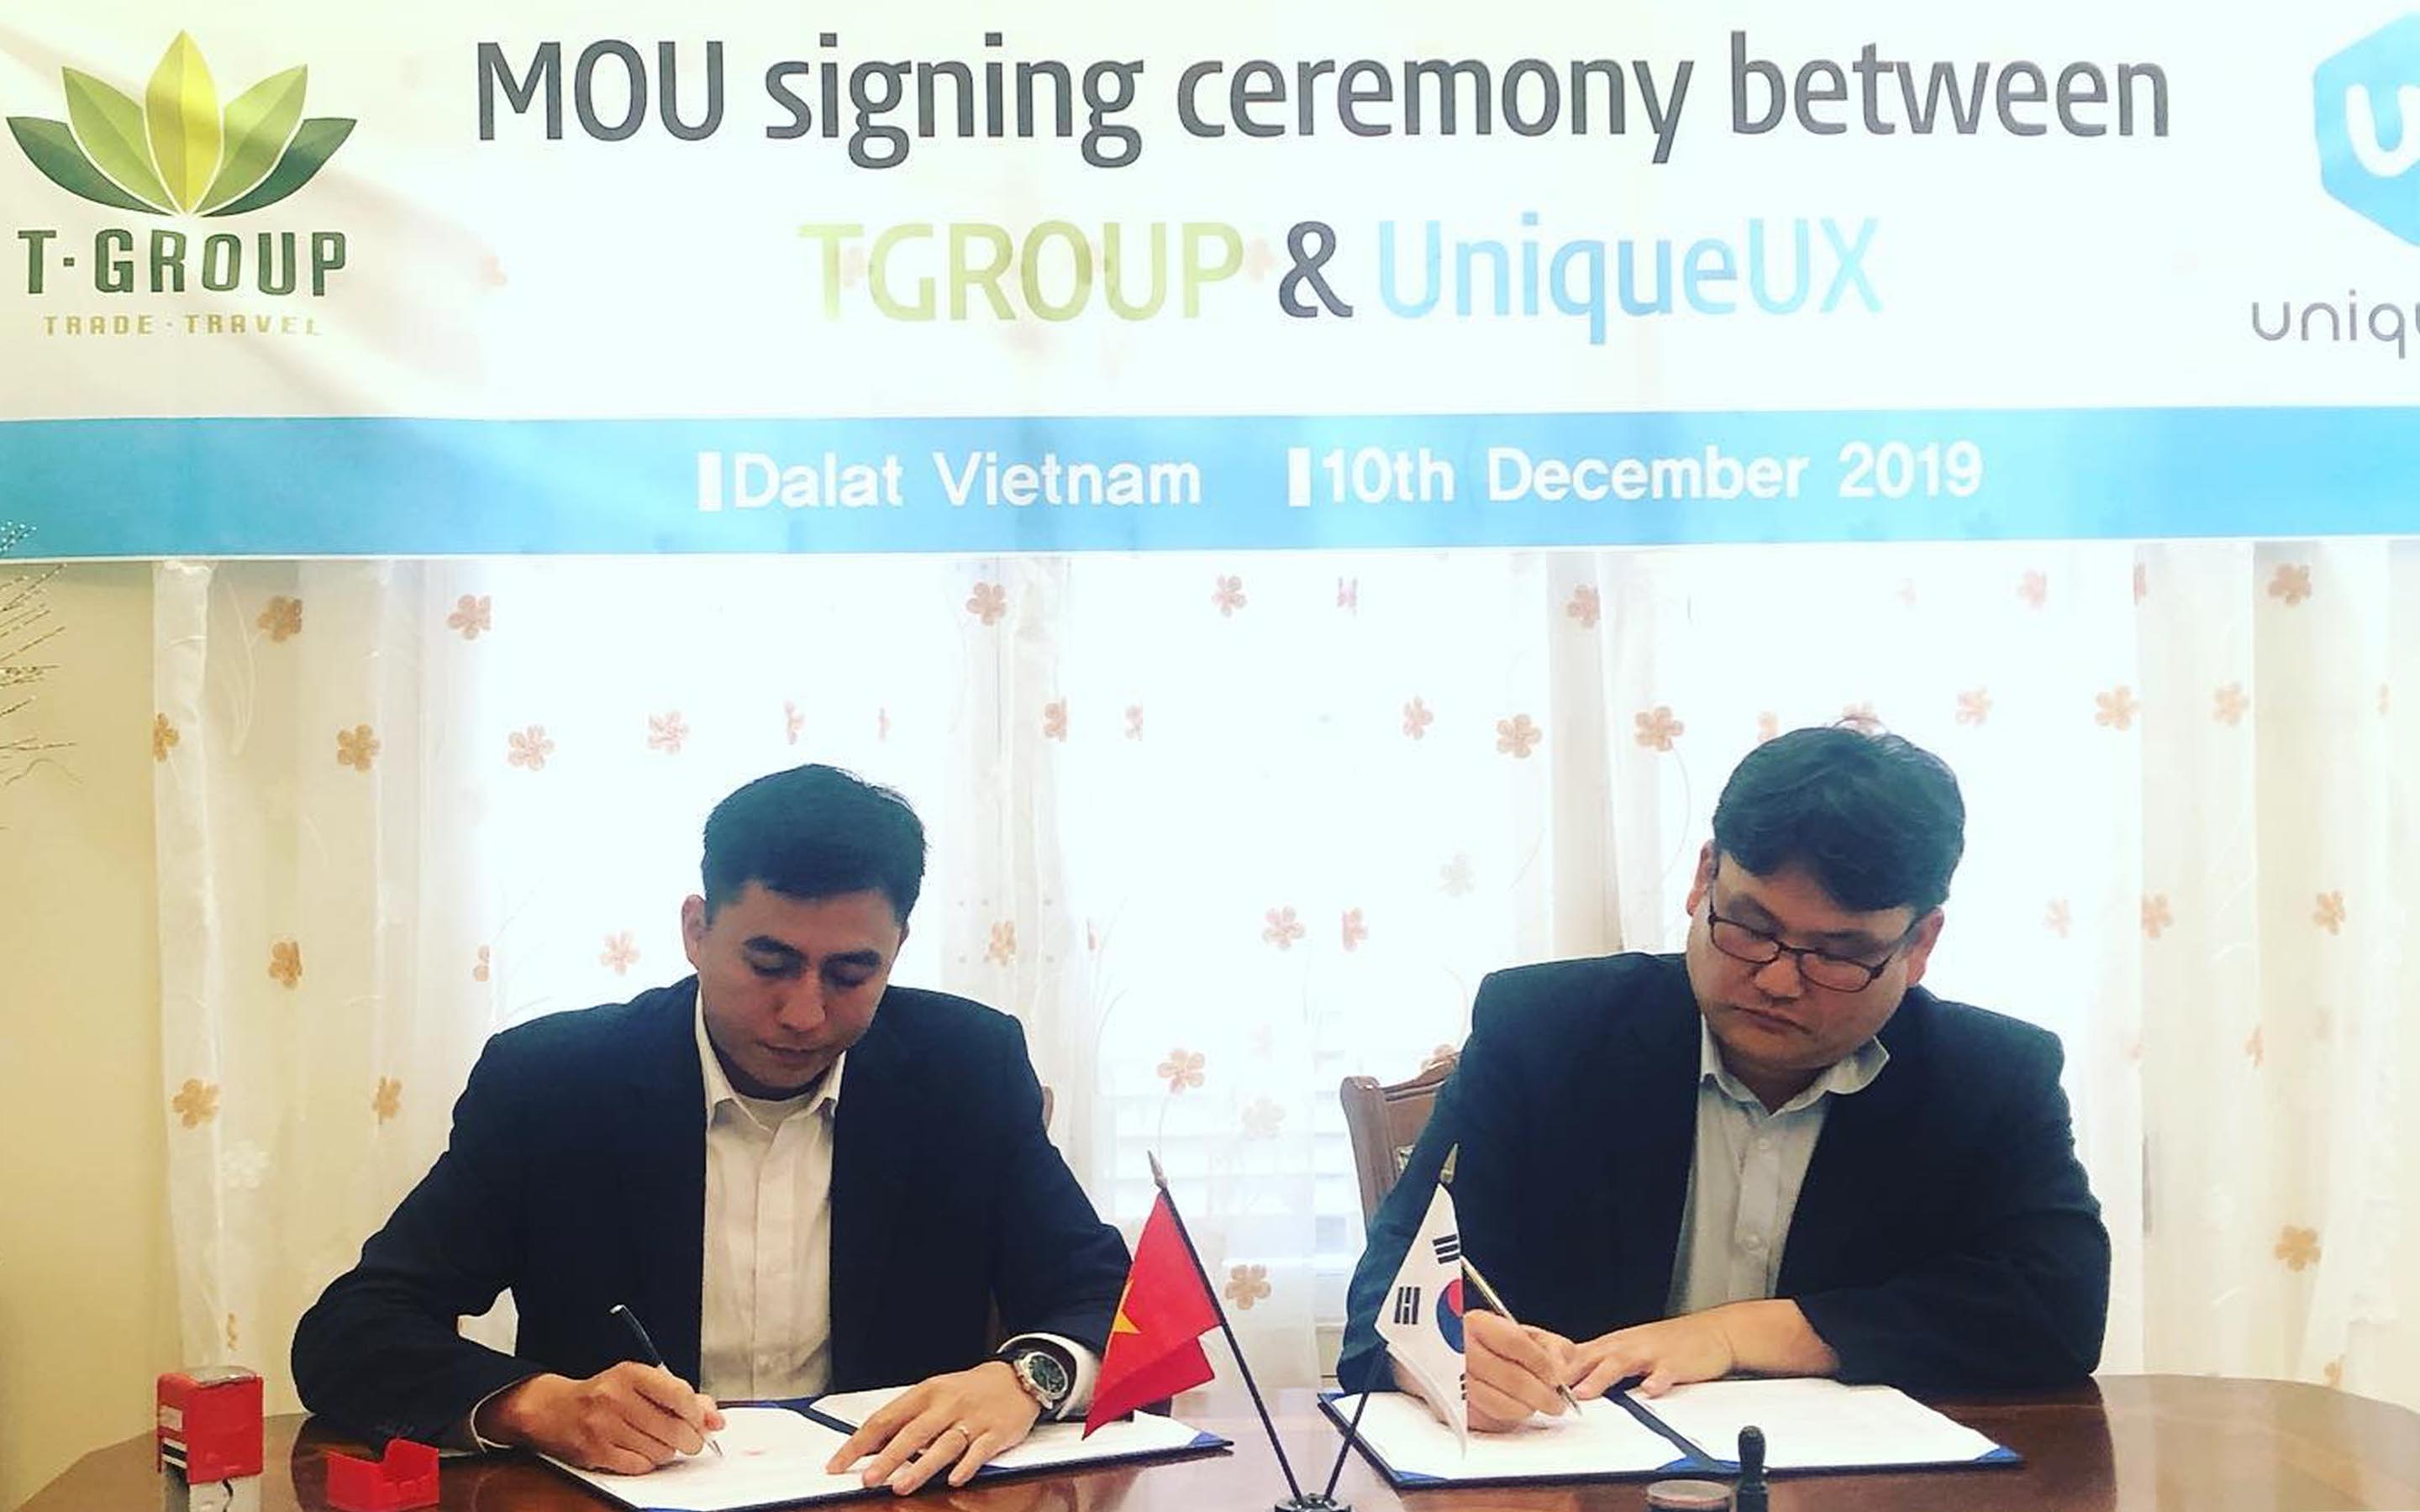 MOU signing ceremony between Tgroup & UniqueUX